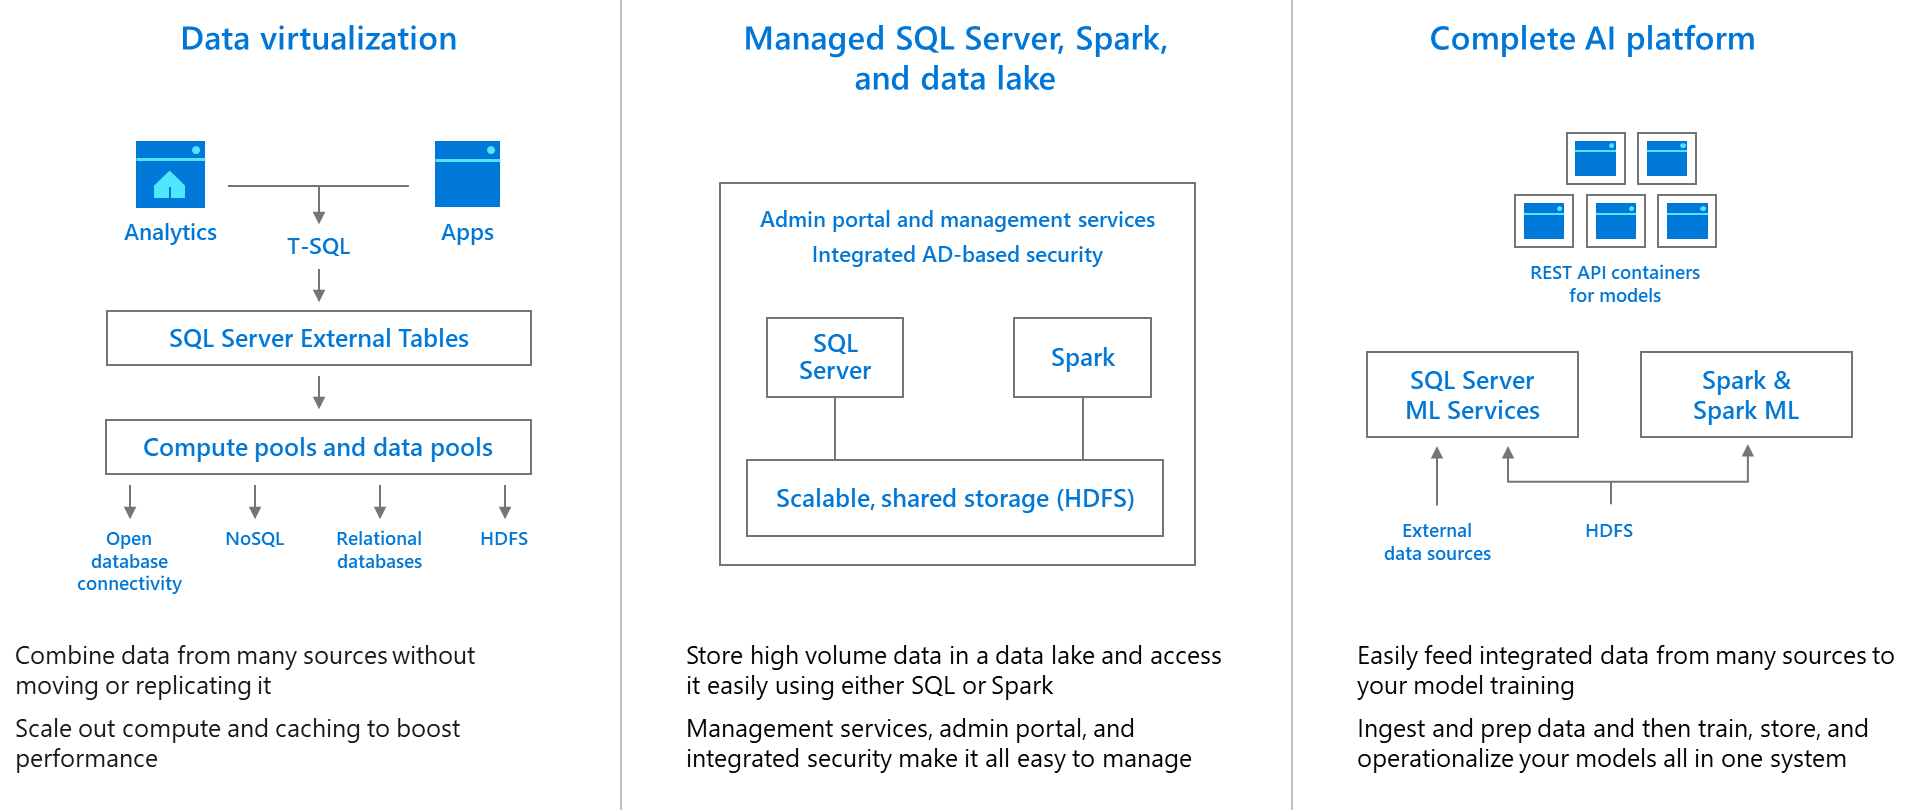 Execute greyed out in View for SQL Server Management Studio 2019 Data-virtualization-managed-sql-server-spark-and-data-lake-complete-ai-platform.png